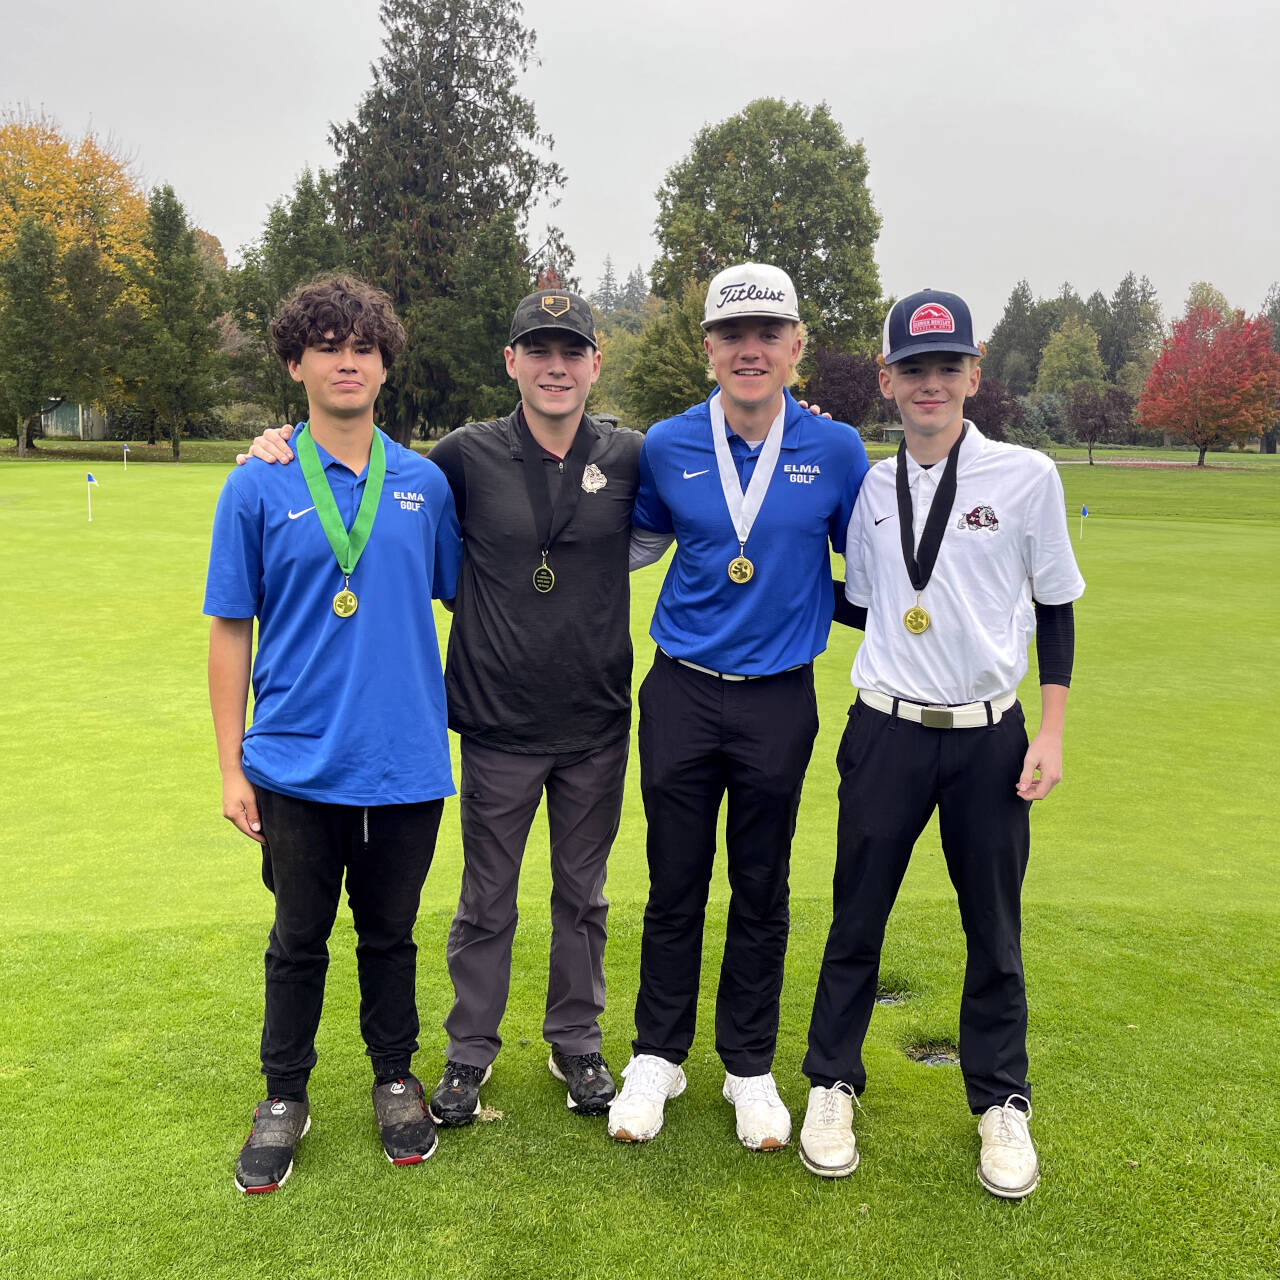 SUBMITTED PHOTO Four of five local boys golf state qualifiers pose for a photo at the conclusion of the 1A District 4 Championships on Tuesday in Tumwater. Pictured are (from left) Elma’s Robby Allen, Montesano’s Colton Grubb, Elma’s Grant Vessey and Montesano’s Ayhden Sauer. Not pictured: Hoquiam’s Riley Montoure.